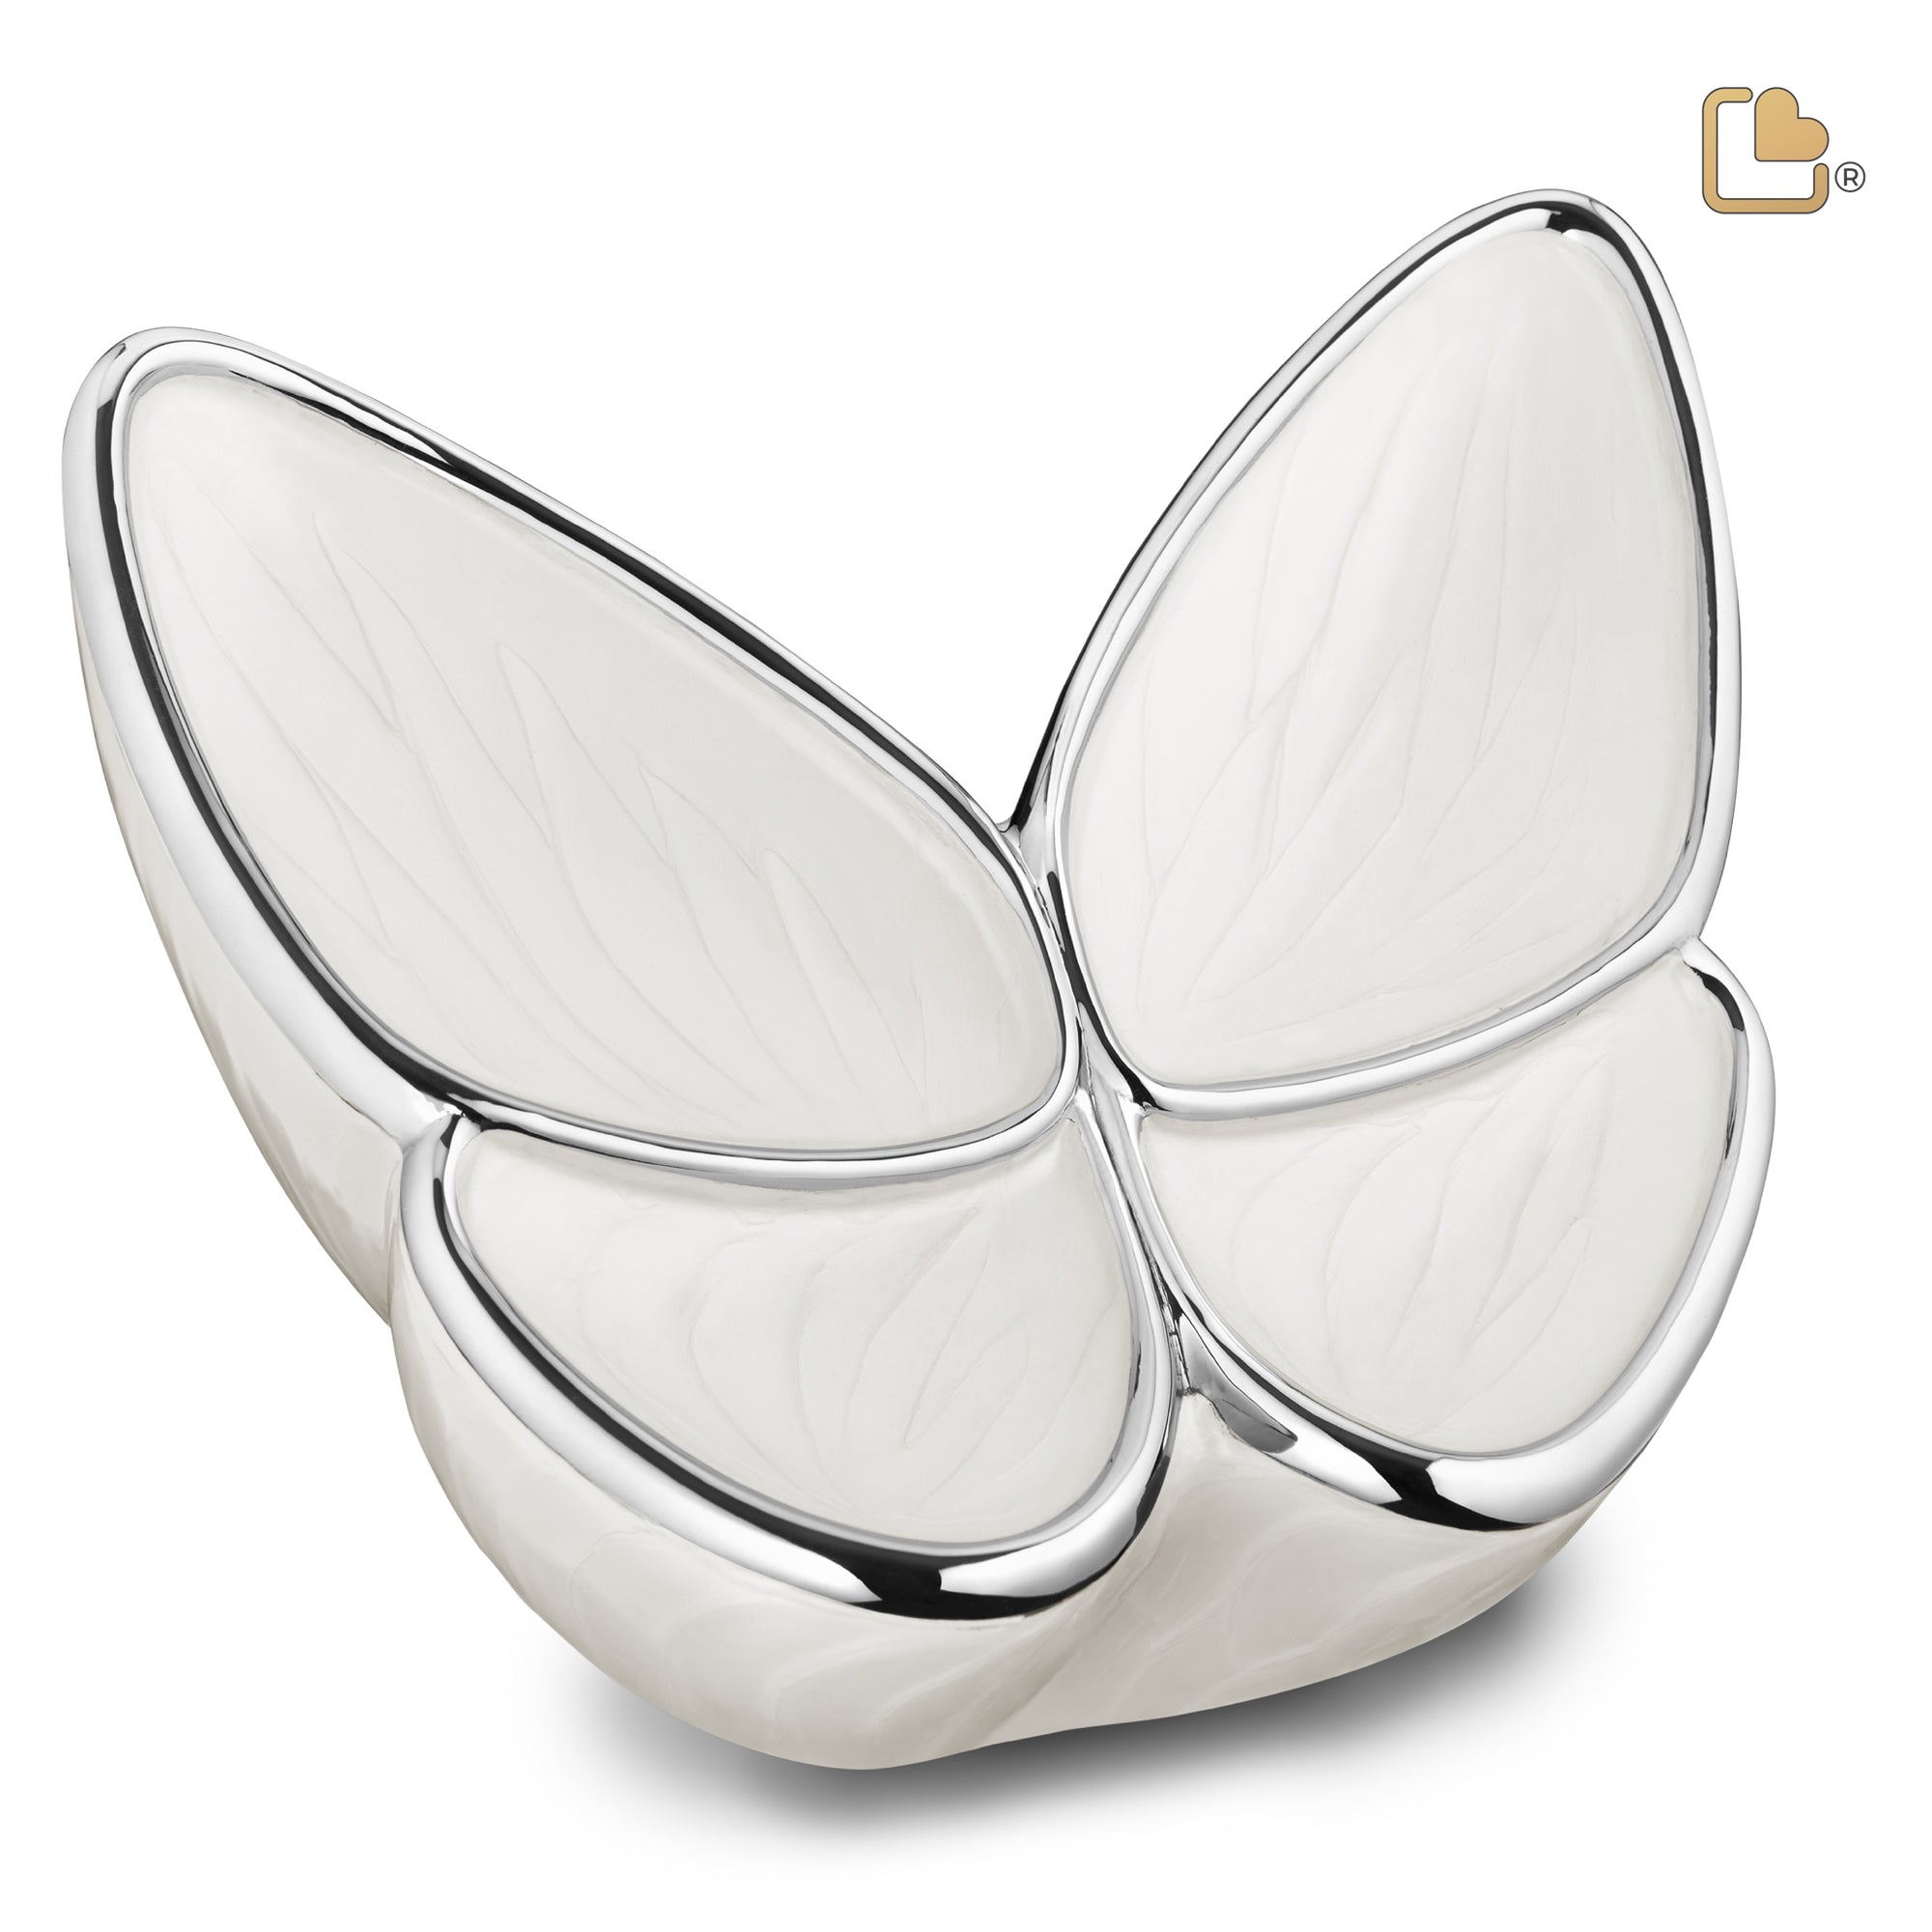 A1042   Wings of Hope Standard Adult Urn Pearl White & Pol Silver